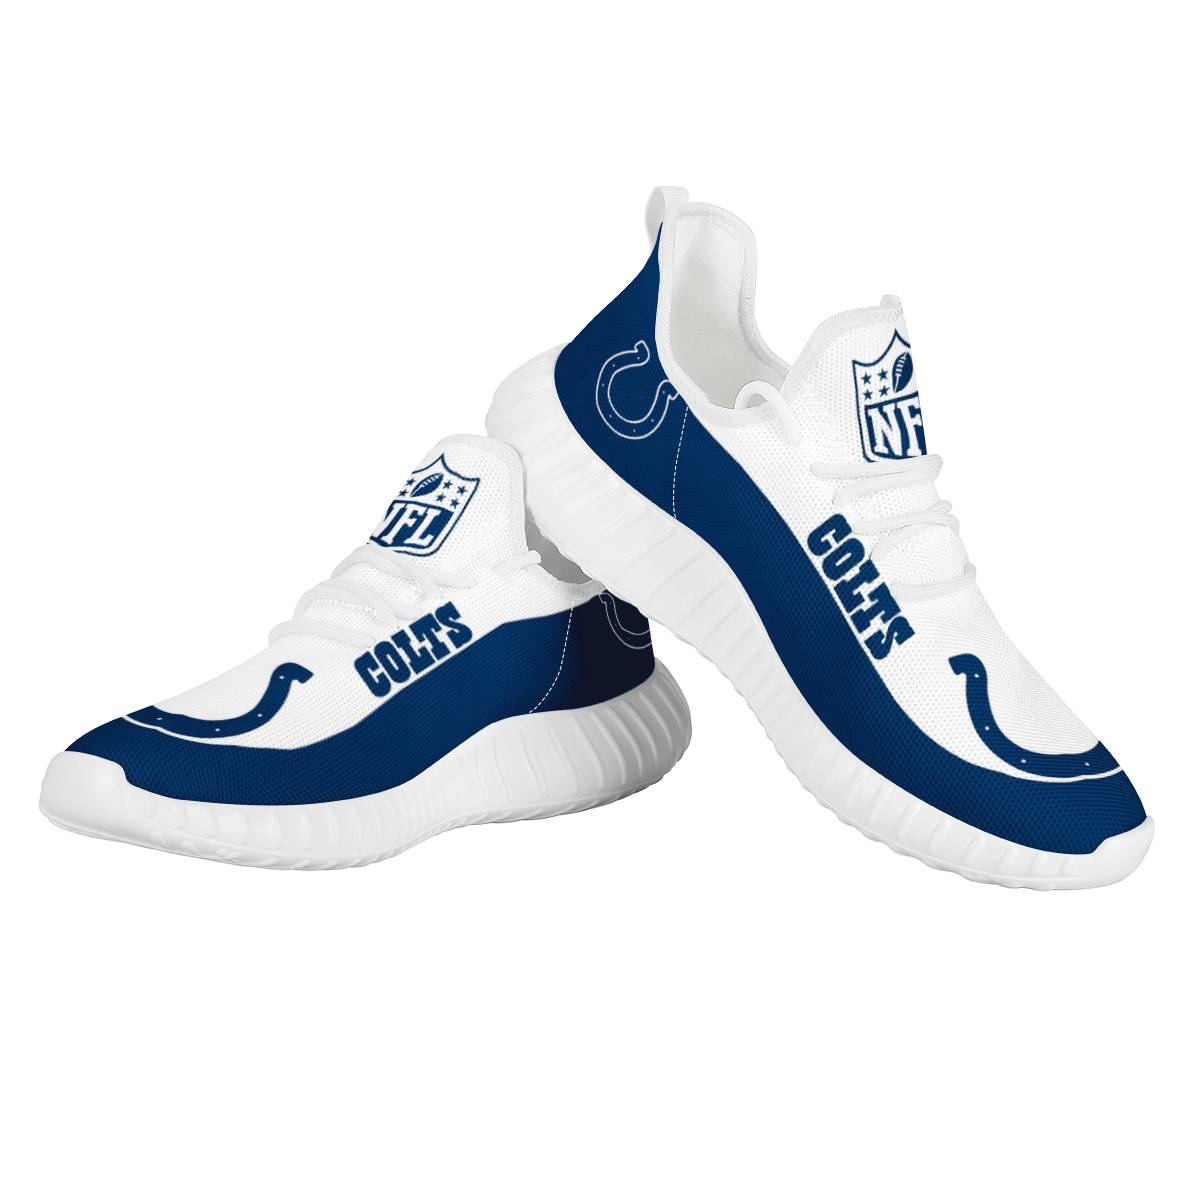 Women's Indianapolis Colts Mesh Knit Sneakers/Shoes 008